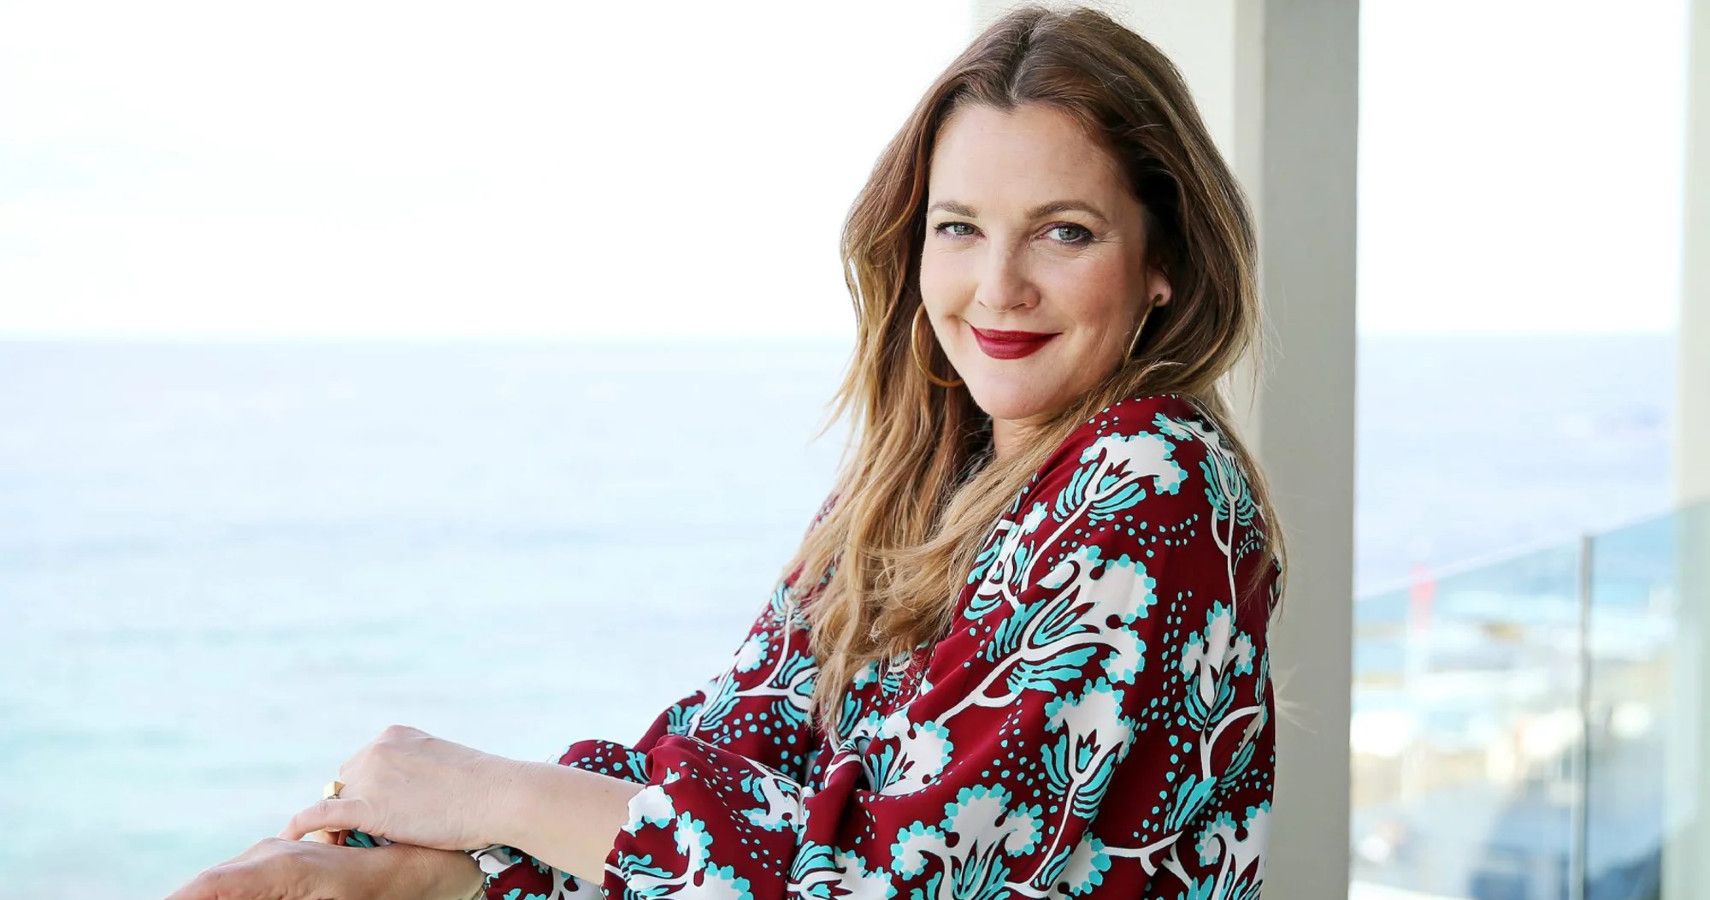 DREW BARRYMORE IN PARTNERSHIP WITH MADE BY GATHER EXPAND THEIR BEAUTIFUL  LINE BEYOND THE KITCHEN